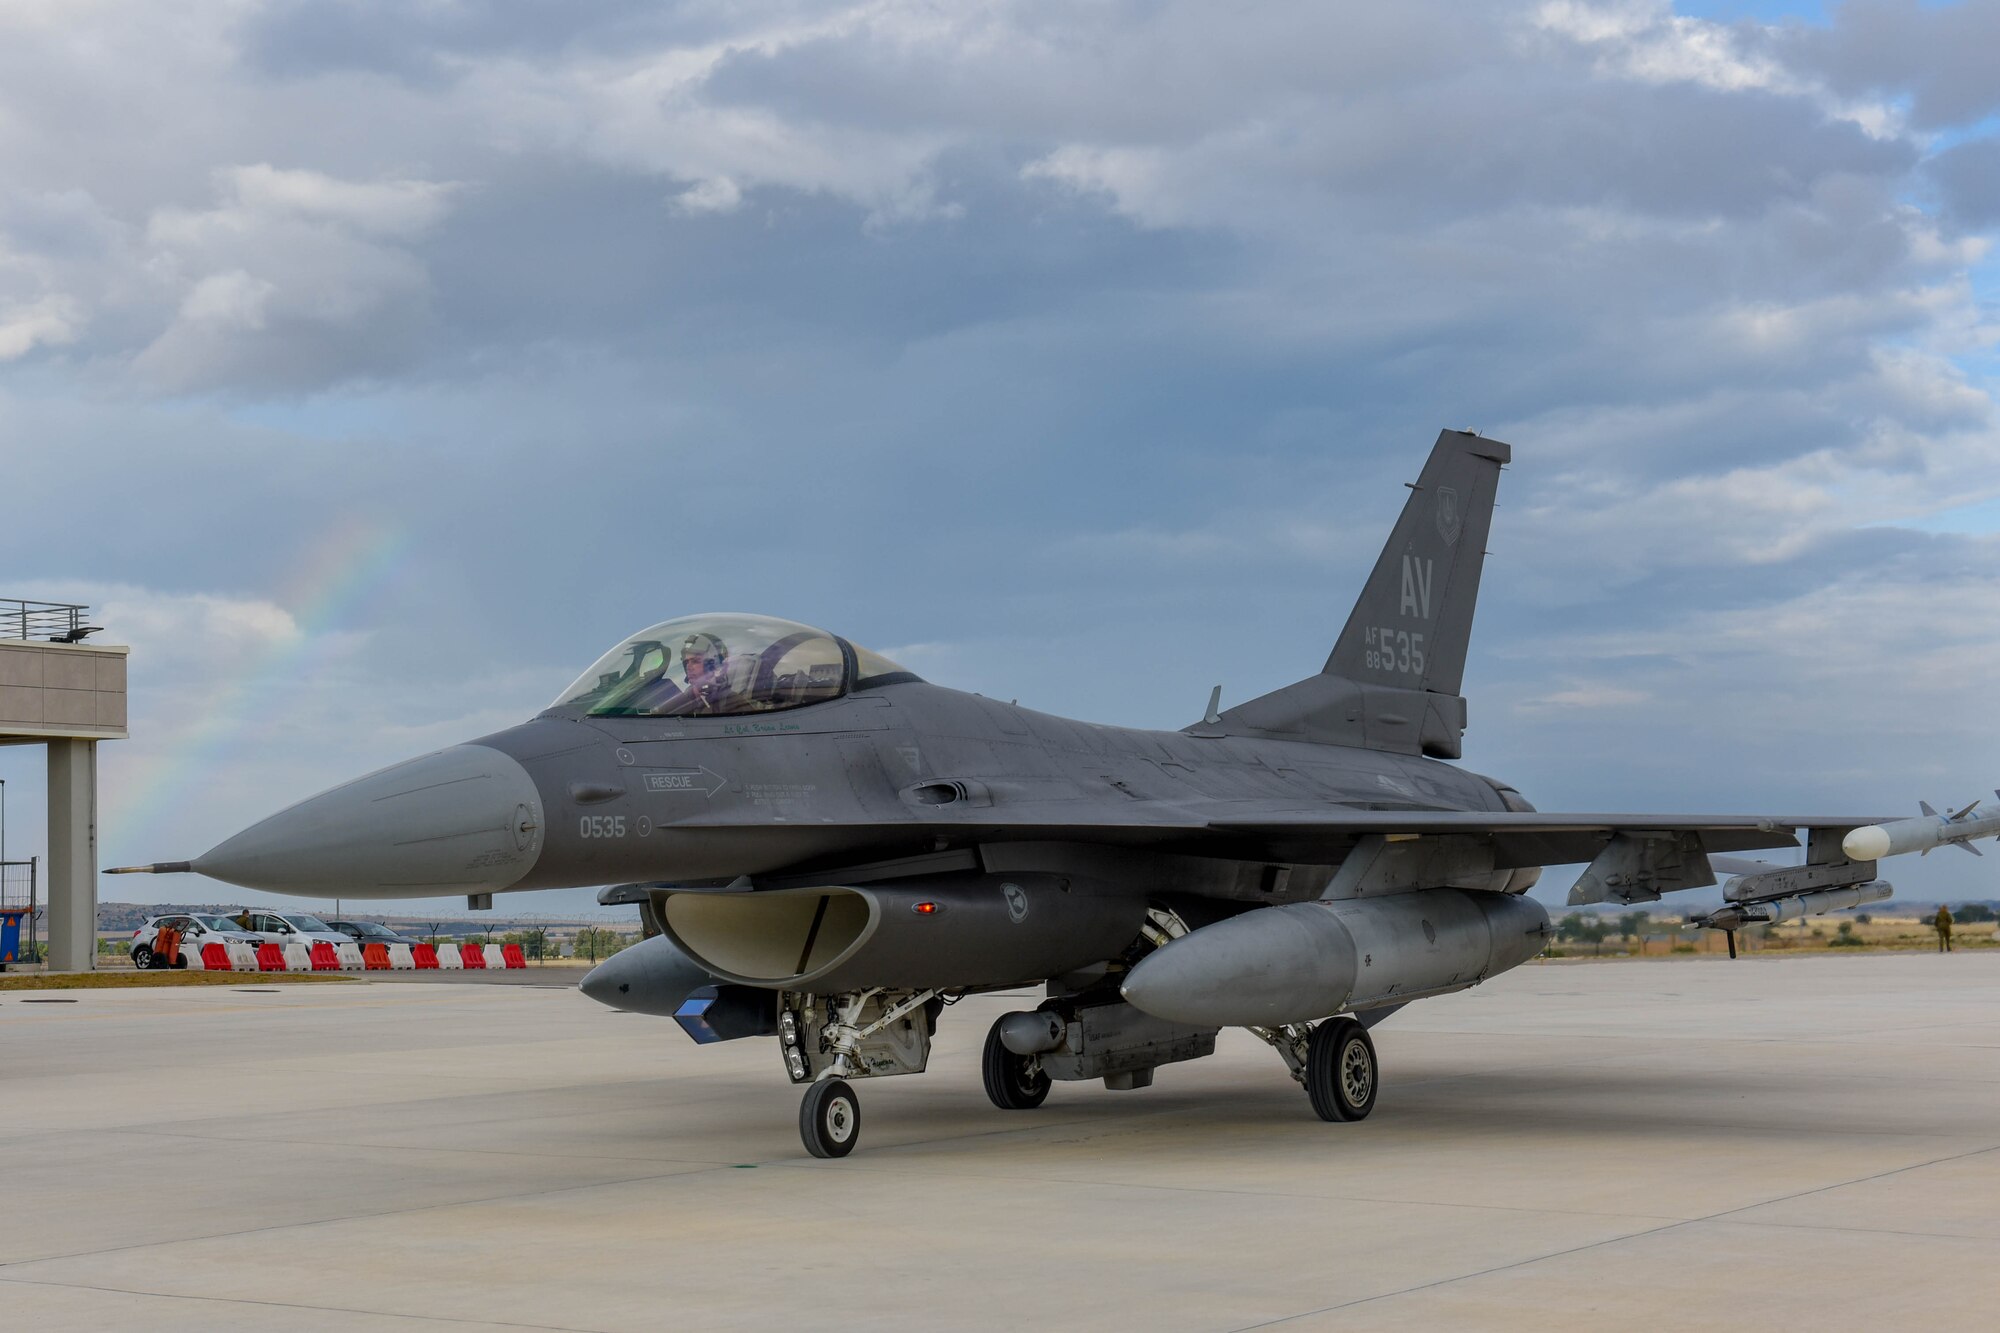 FS21 is an exercise that optimizes the integration between fourth-generation and fifth-generation aircraft.